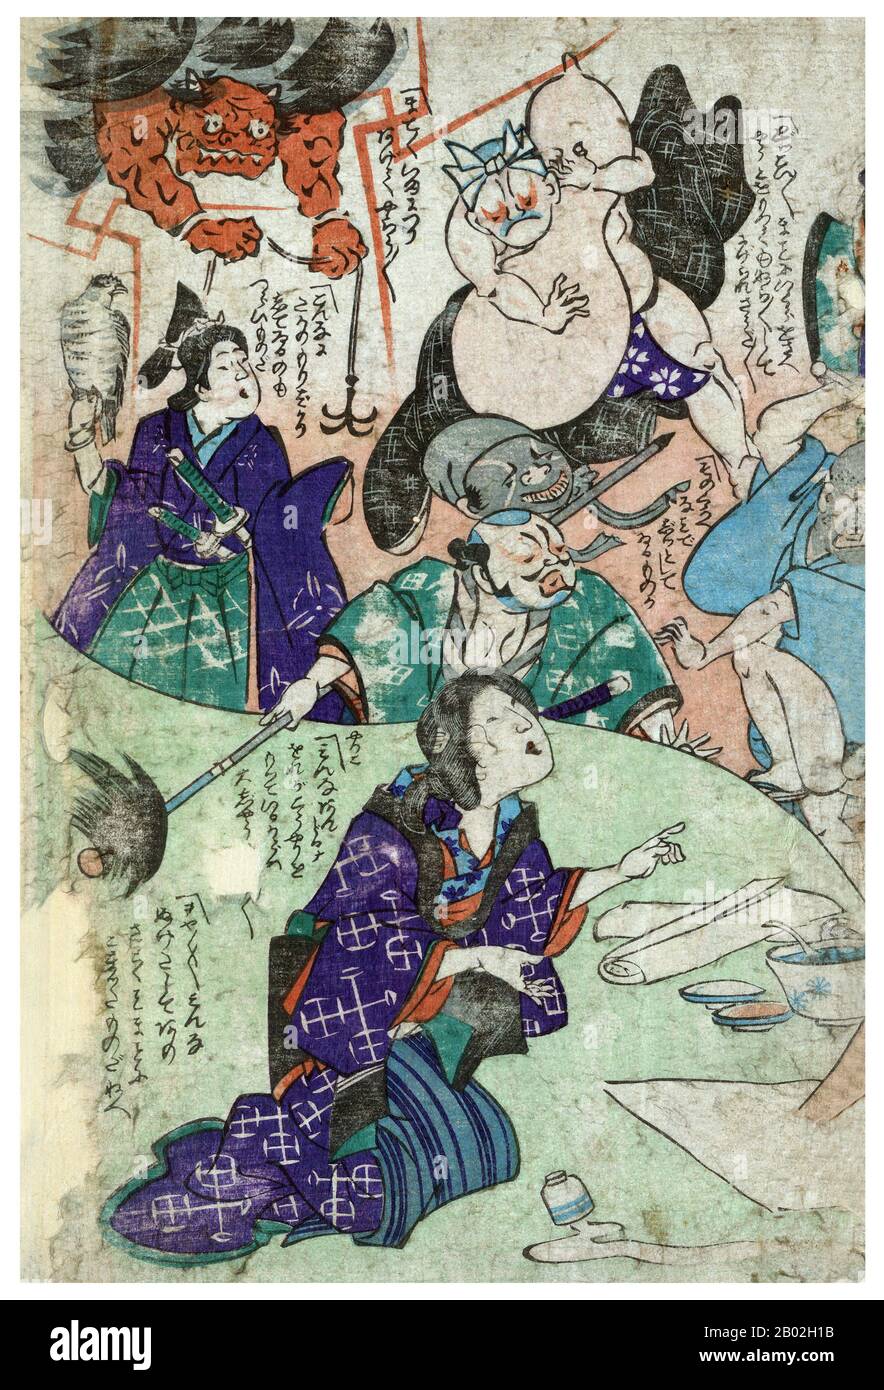 Ukiyo-e woodblock print showing an artist in the foreground and various characters in the background including a demon holding an anchor, a samurai with a falcon, a man with long pike, and a wrestler. Stock Photo